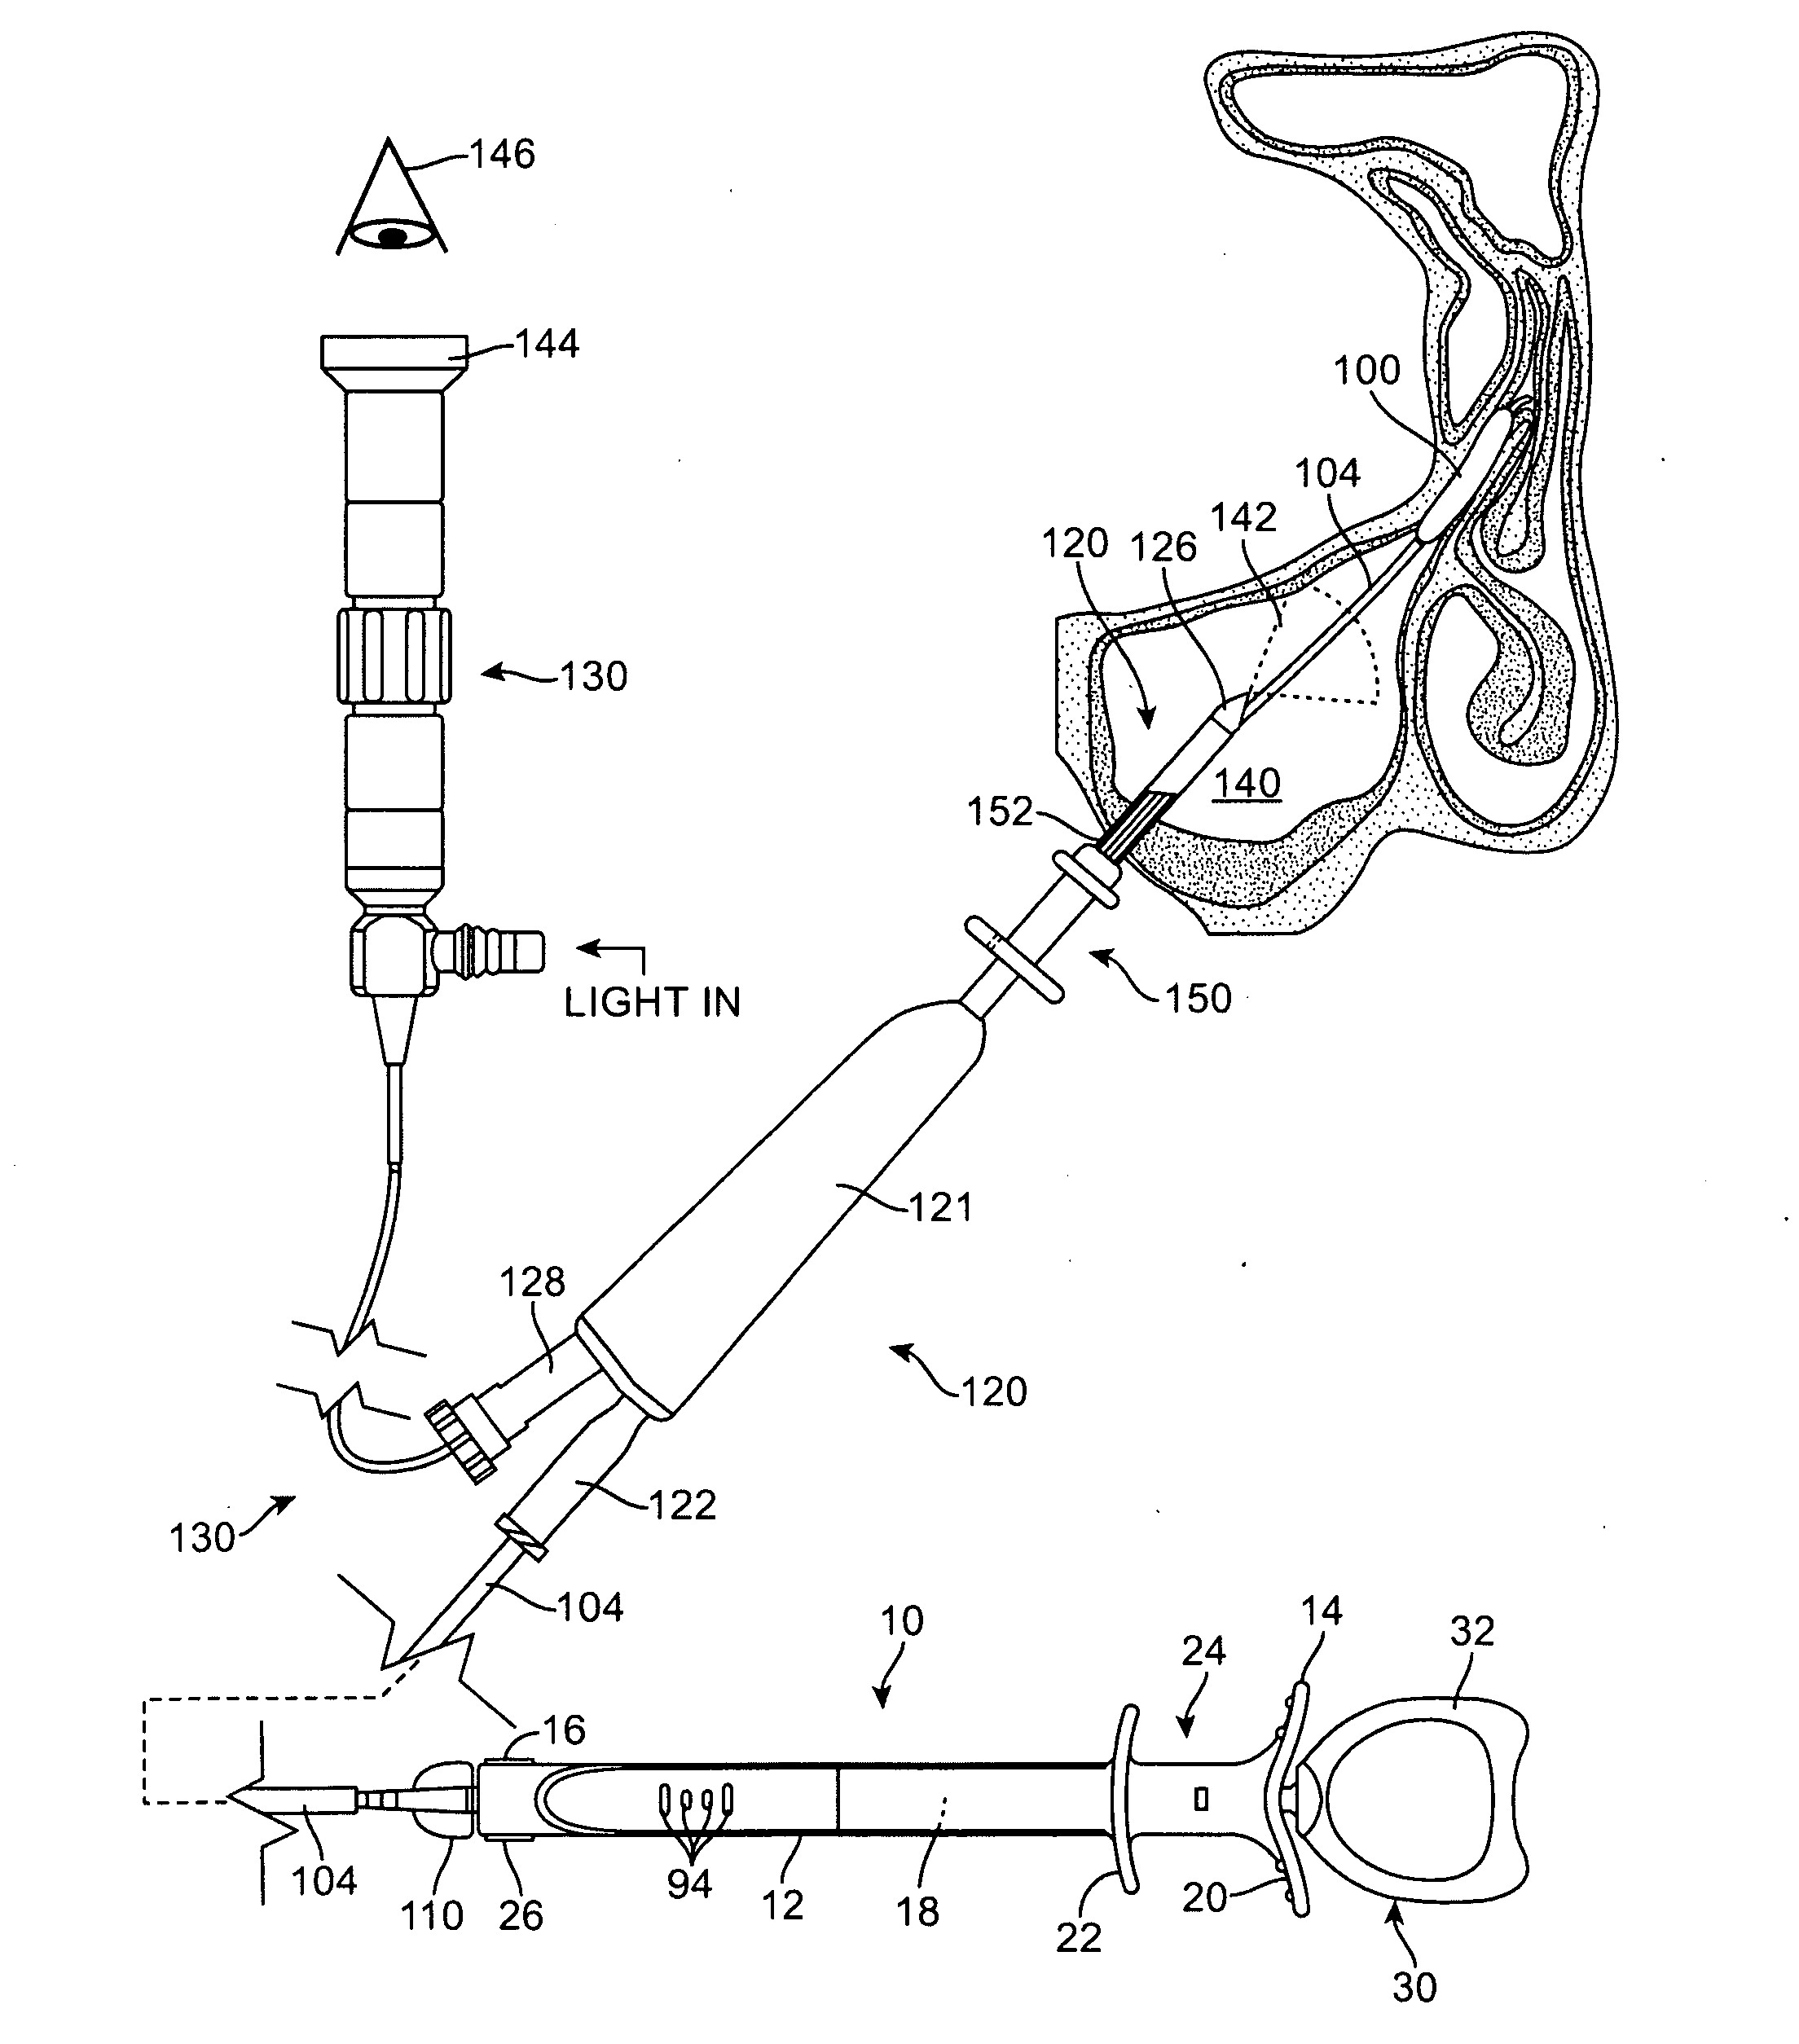 Balloon catheter inflation apparatus and methods